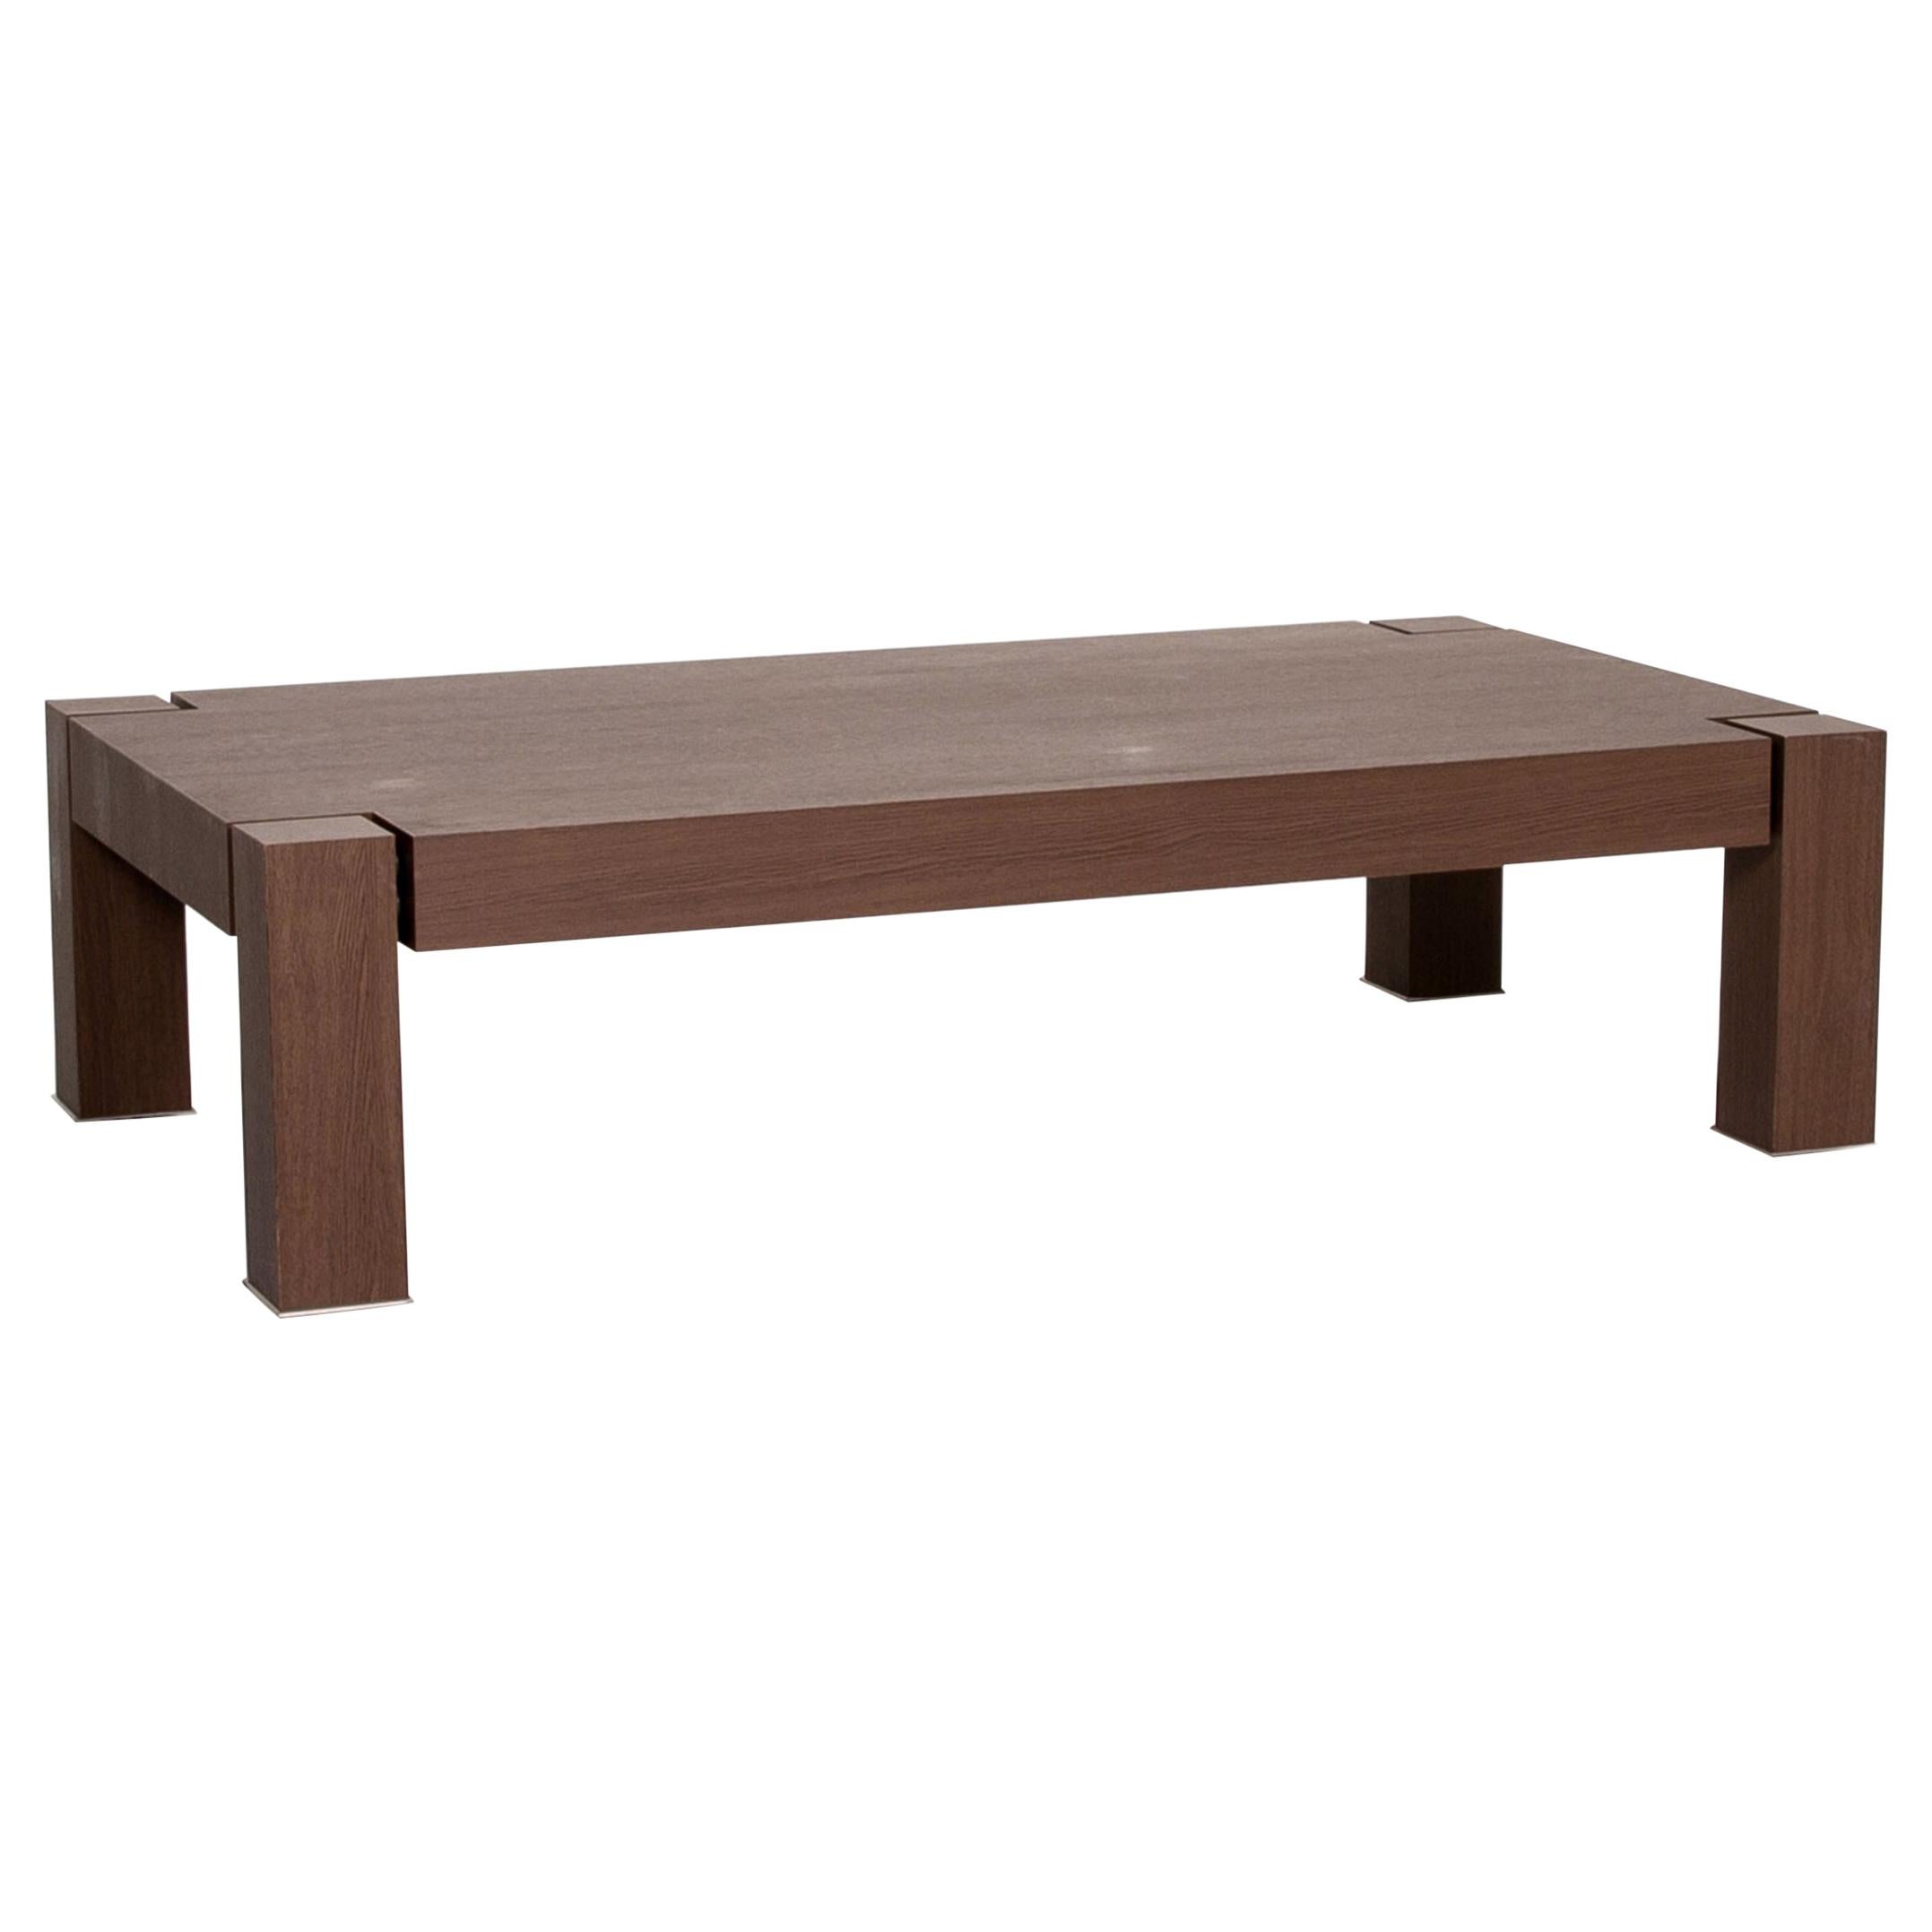 Natuzzi Wooden Coffee Table Brown Table